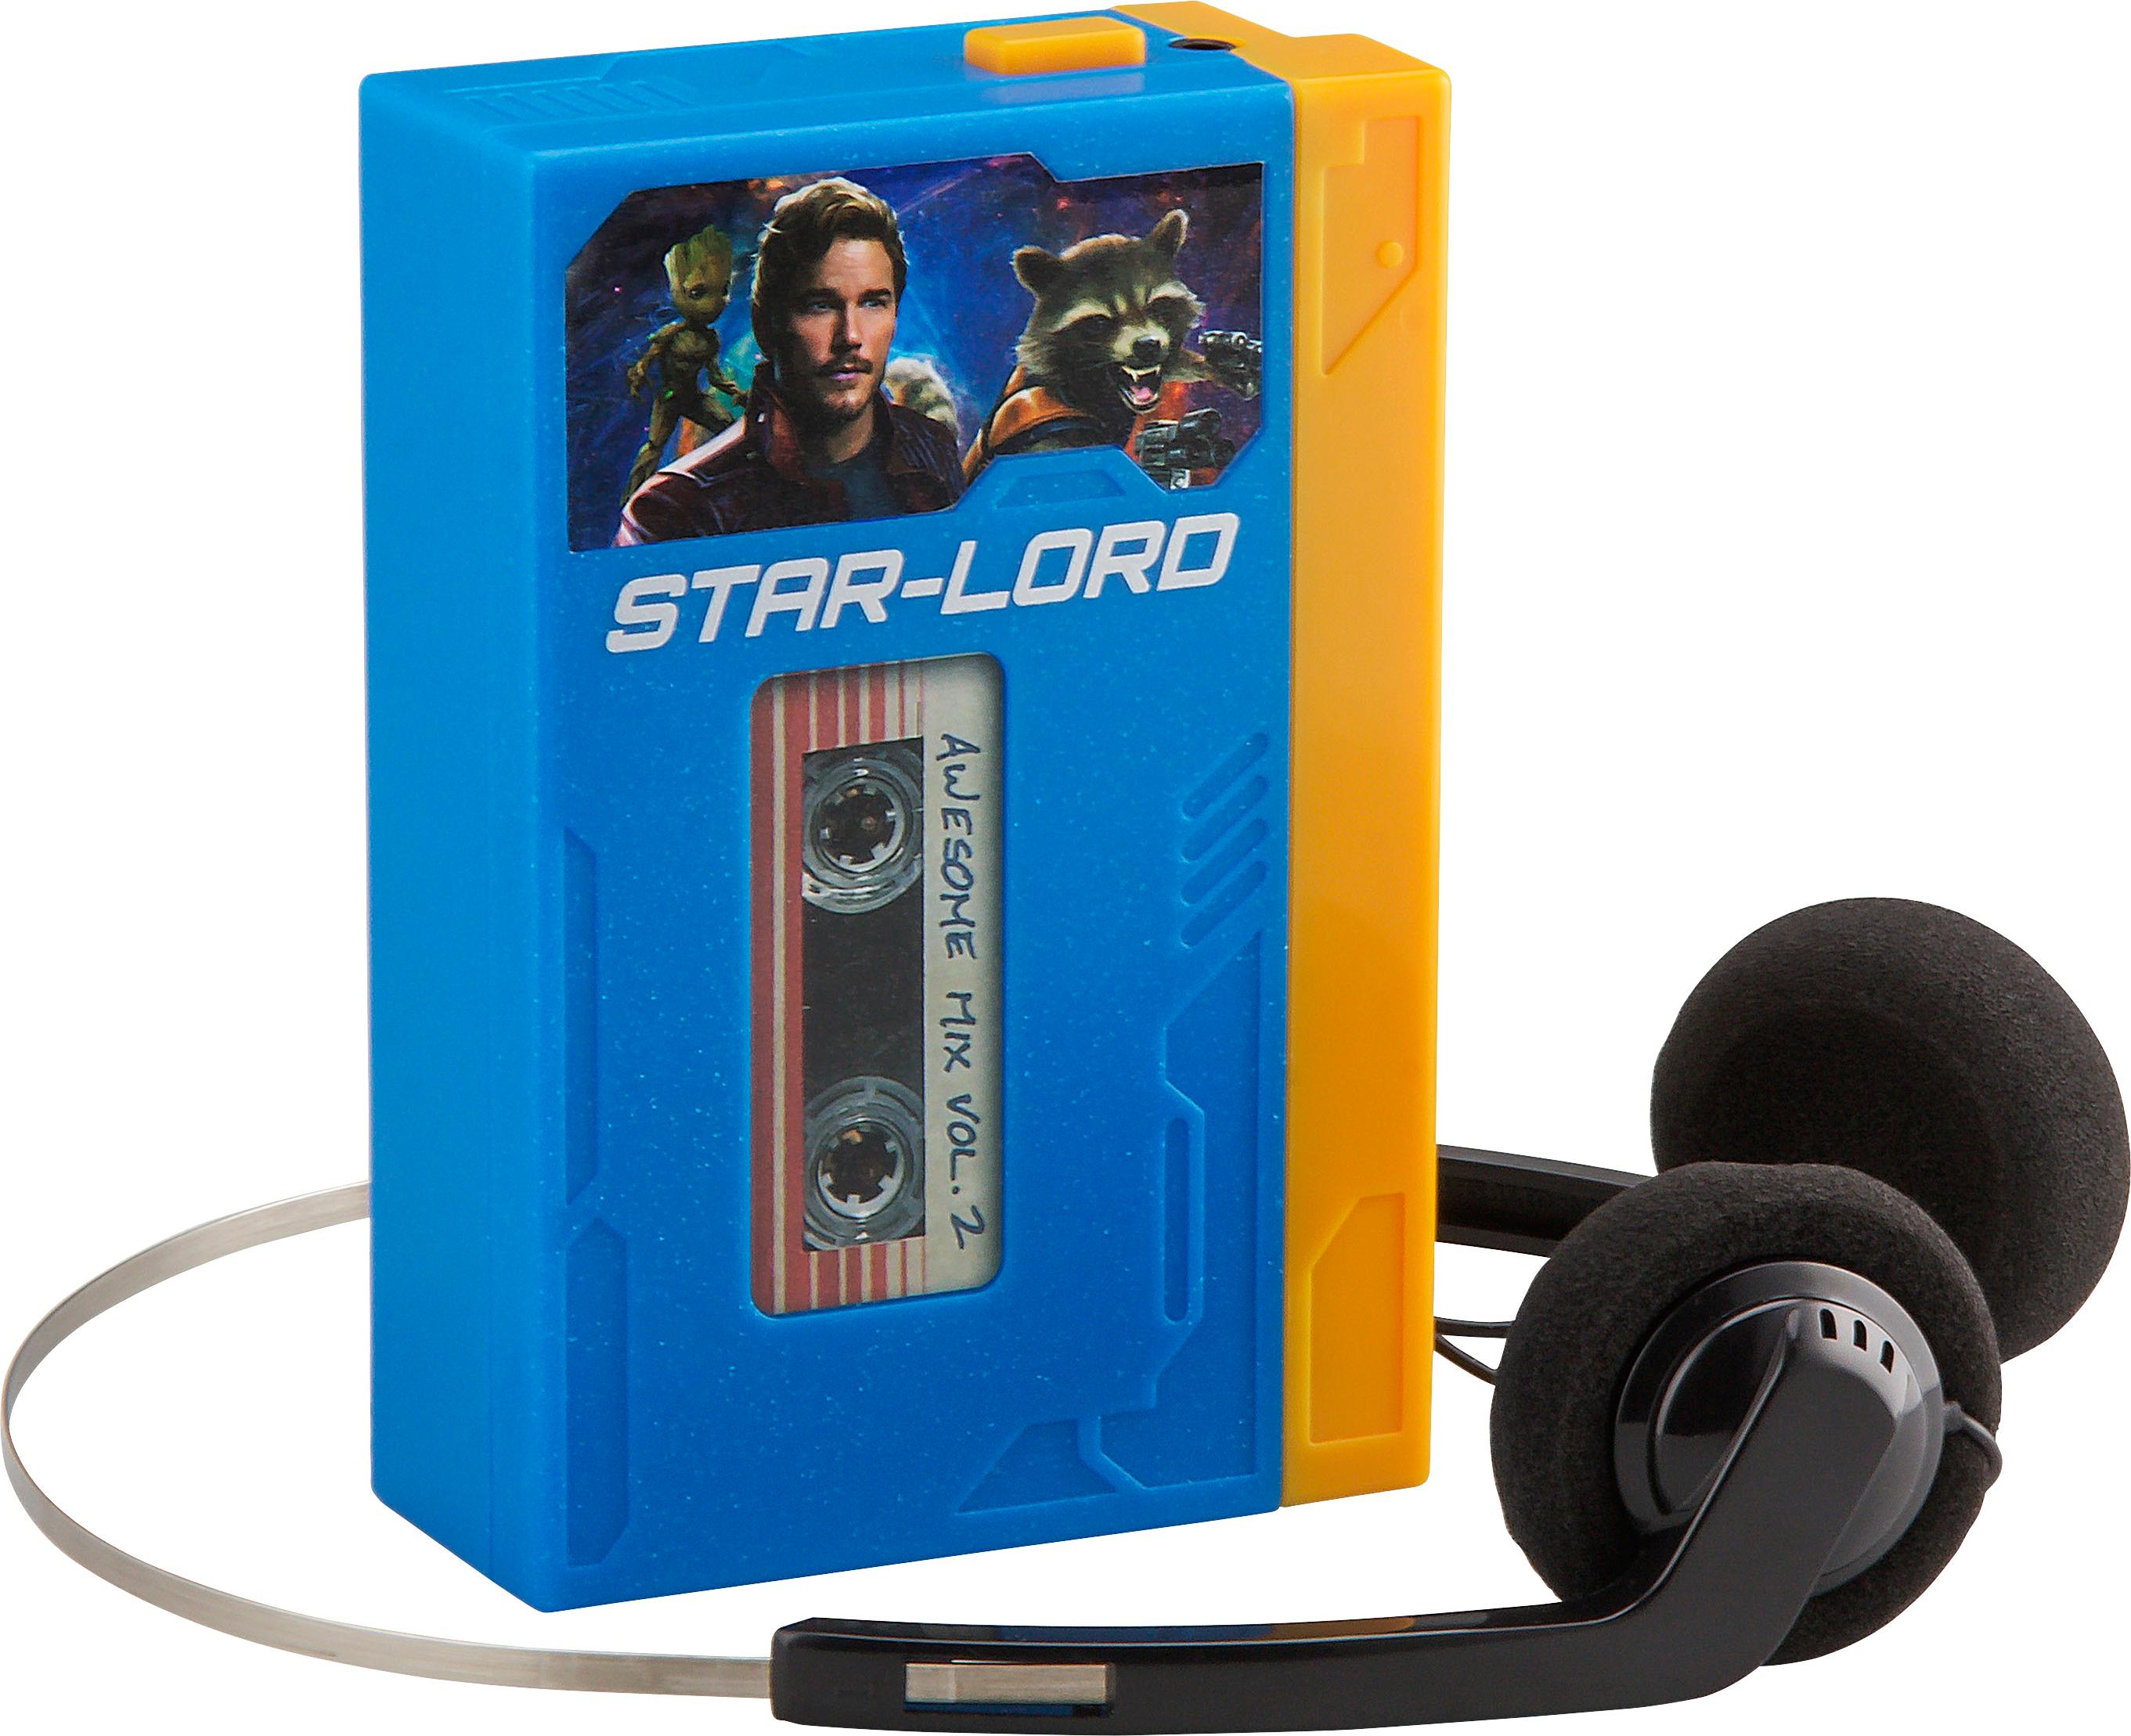 Marvel Guardians of The Galaxy Vol 2 Cosplay Mp3 Cassette Player Walkman for sale online 